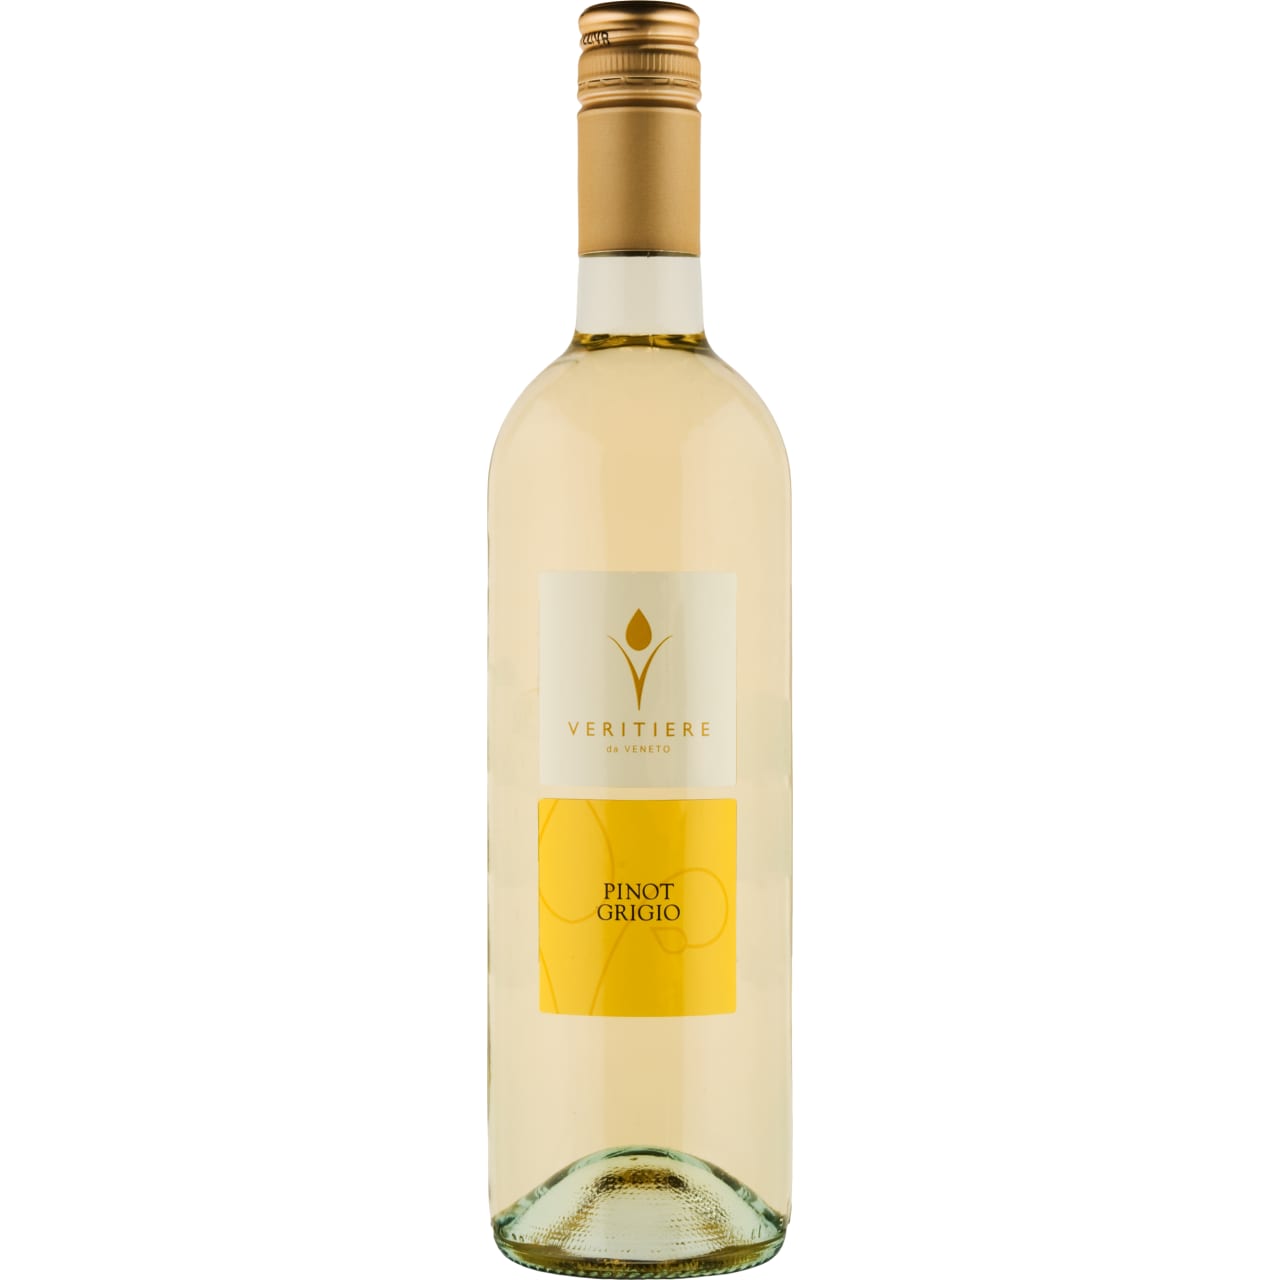 Straw yellow colour and intense perfume, lasting fruity bouquet. On the palate this wine is dry, soft and well balanced, thanks to its full body.